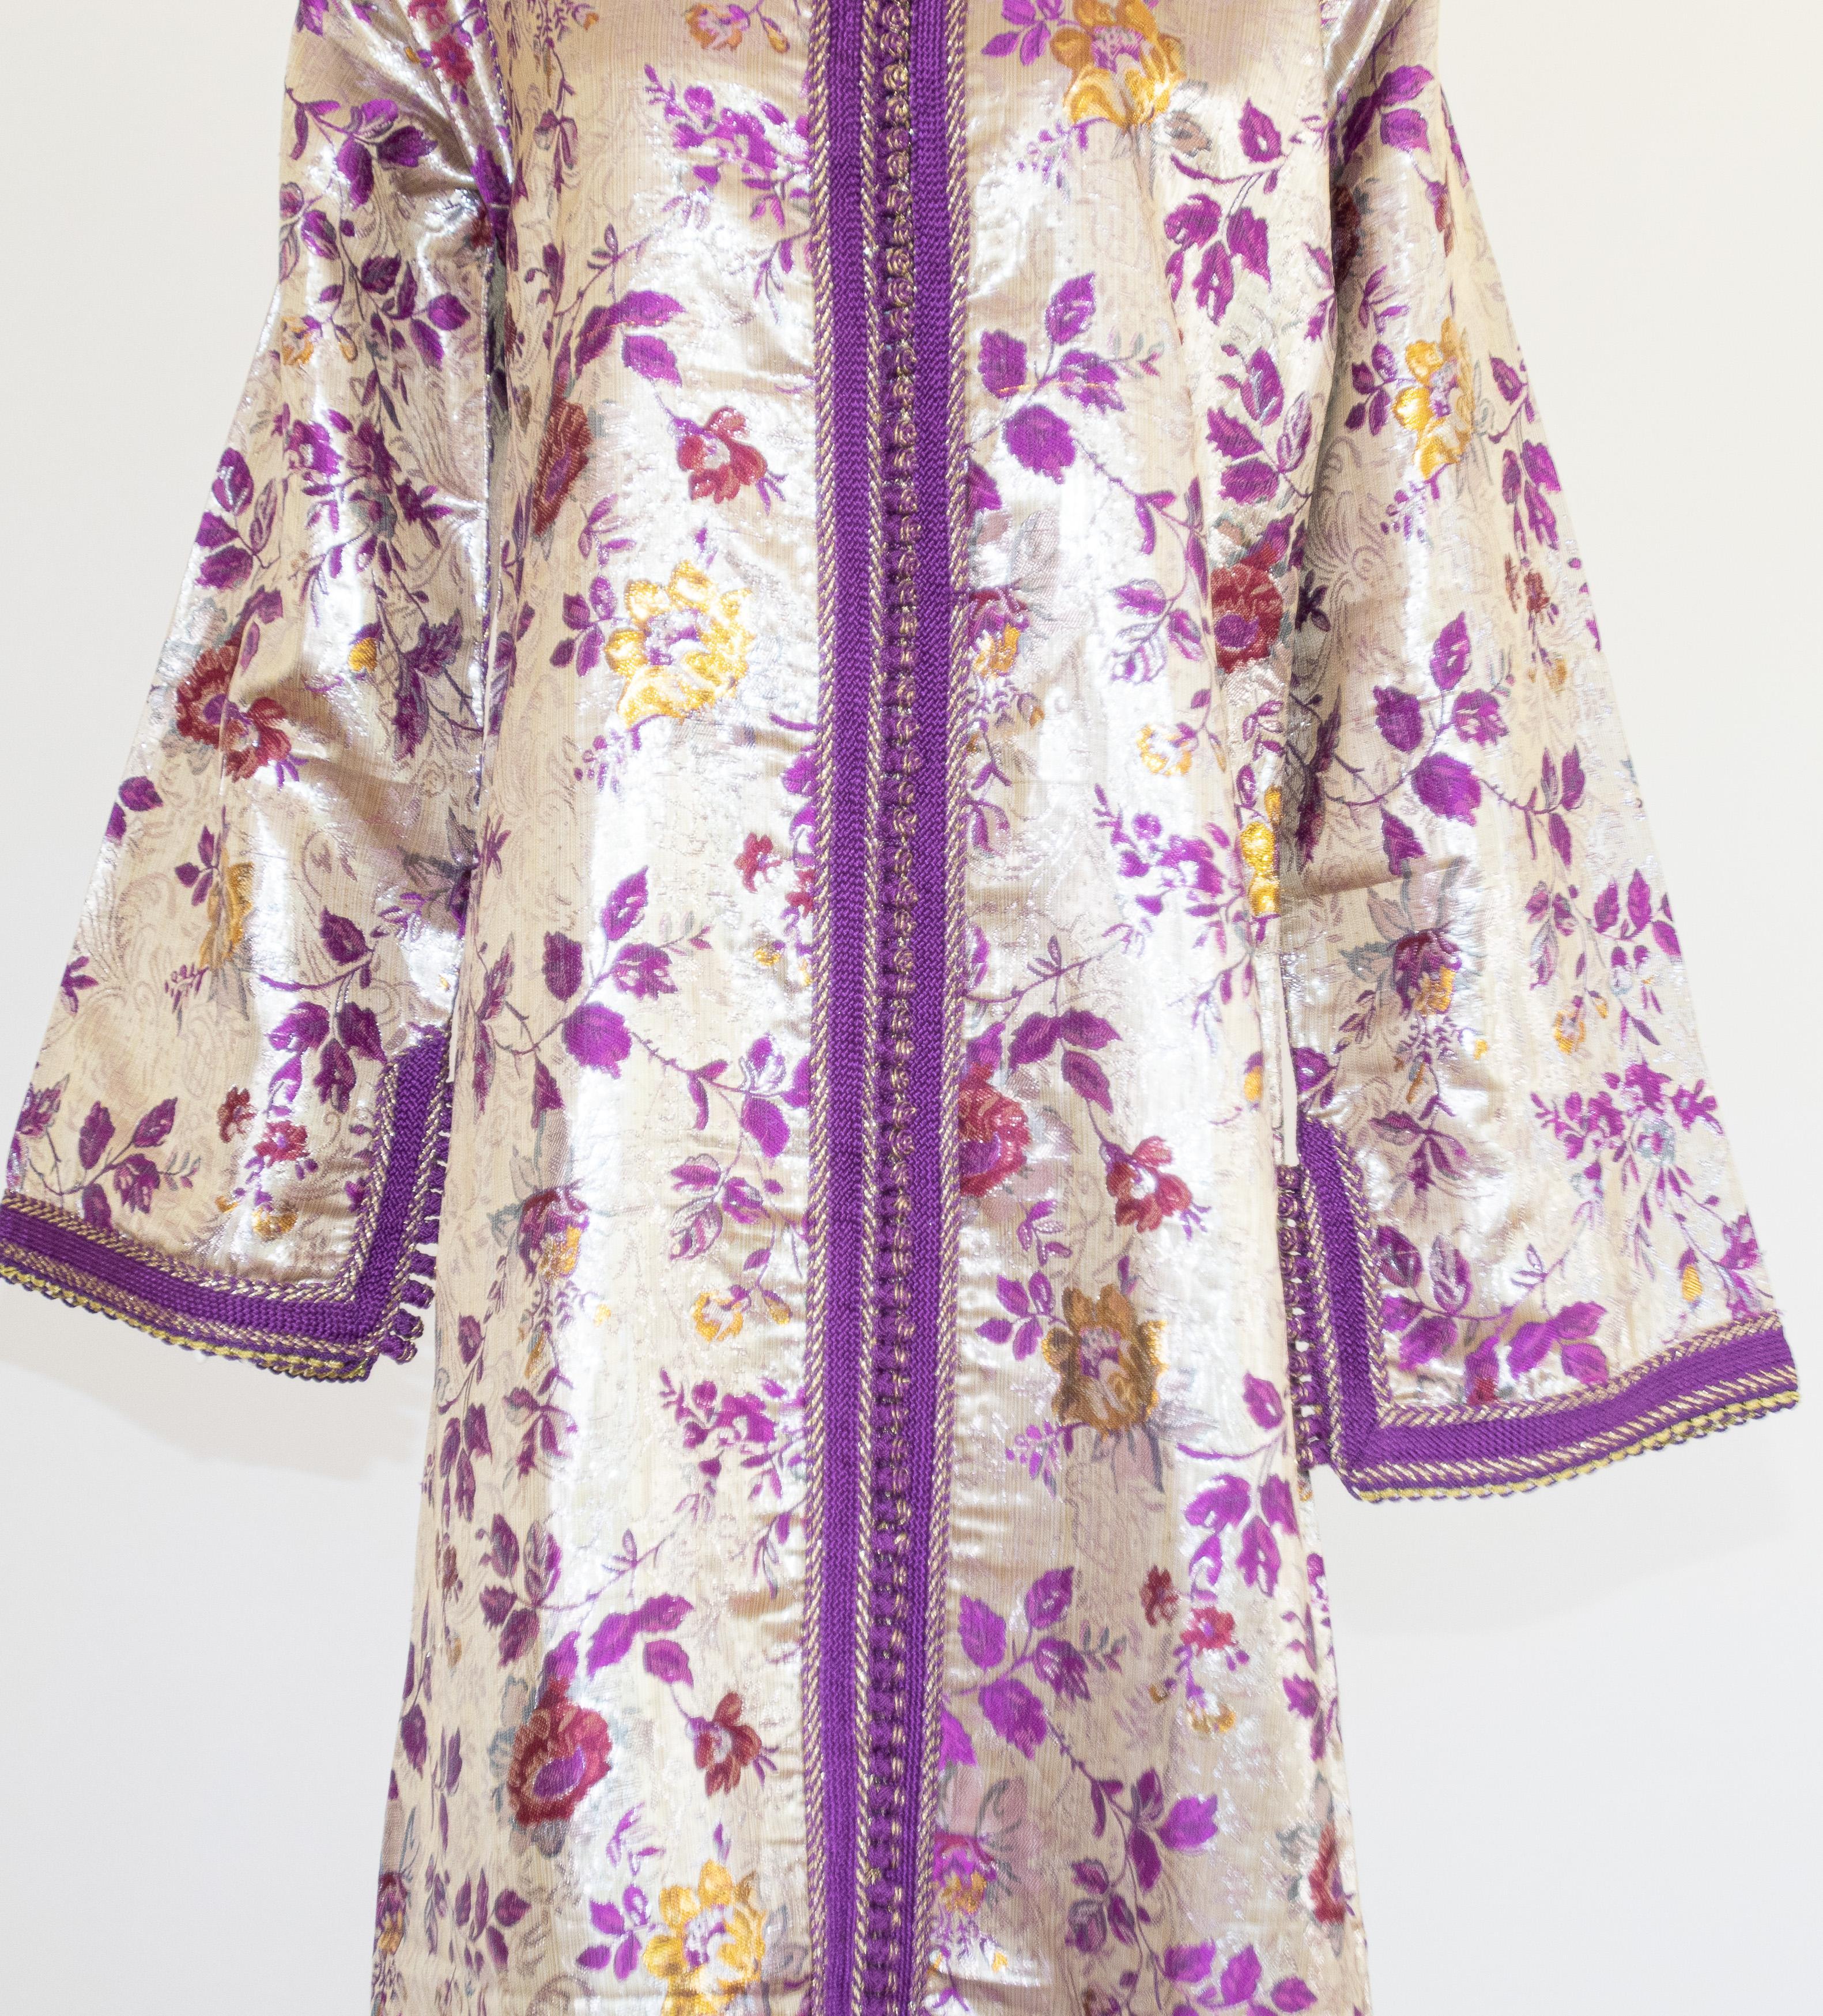 Moroccan Caftan Purple and Silver Damask Embroidered, Vintage, 1960s In Good Condition For Sale In North Hollywood, CA